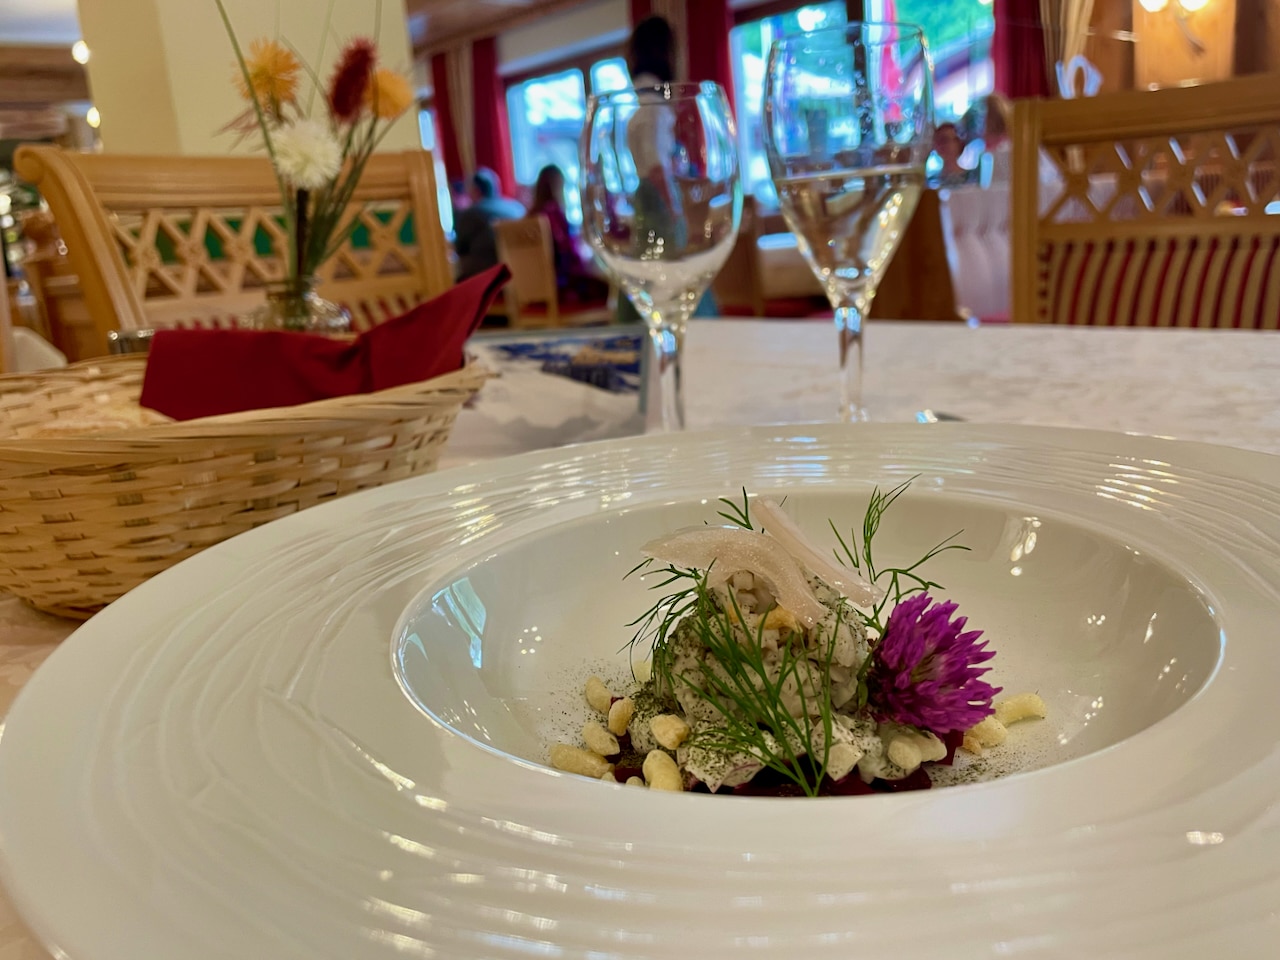 We were spoiled with regional Tyrolean cuisine prepared with fresh local produce. You will be amazed by the delicious dishes! Hotel Alte Post Fieberbrunn experiences ratings field report